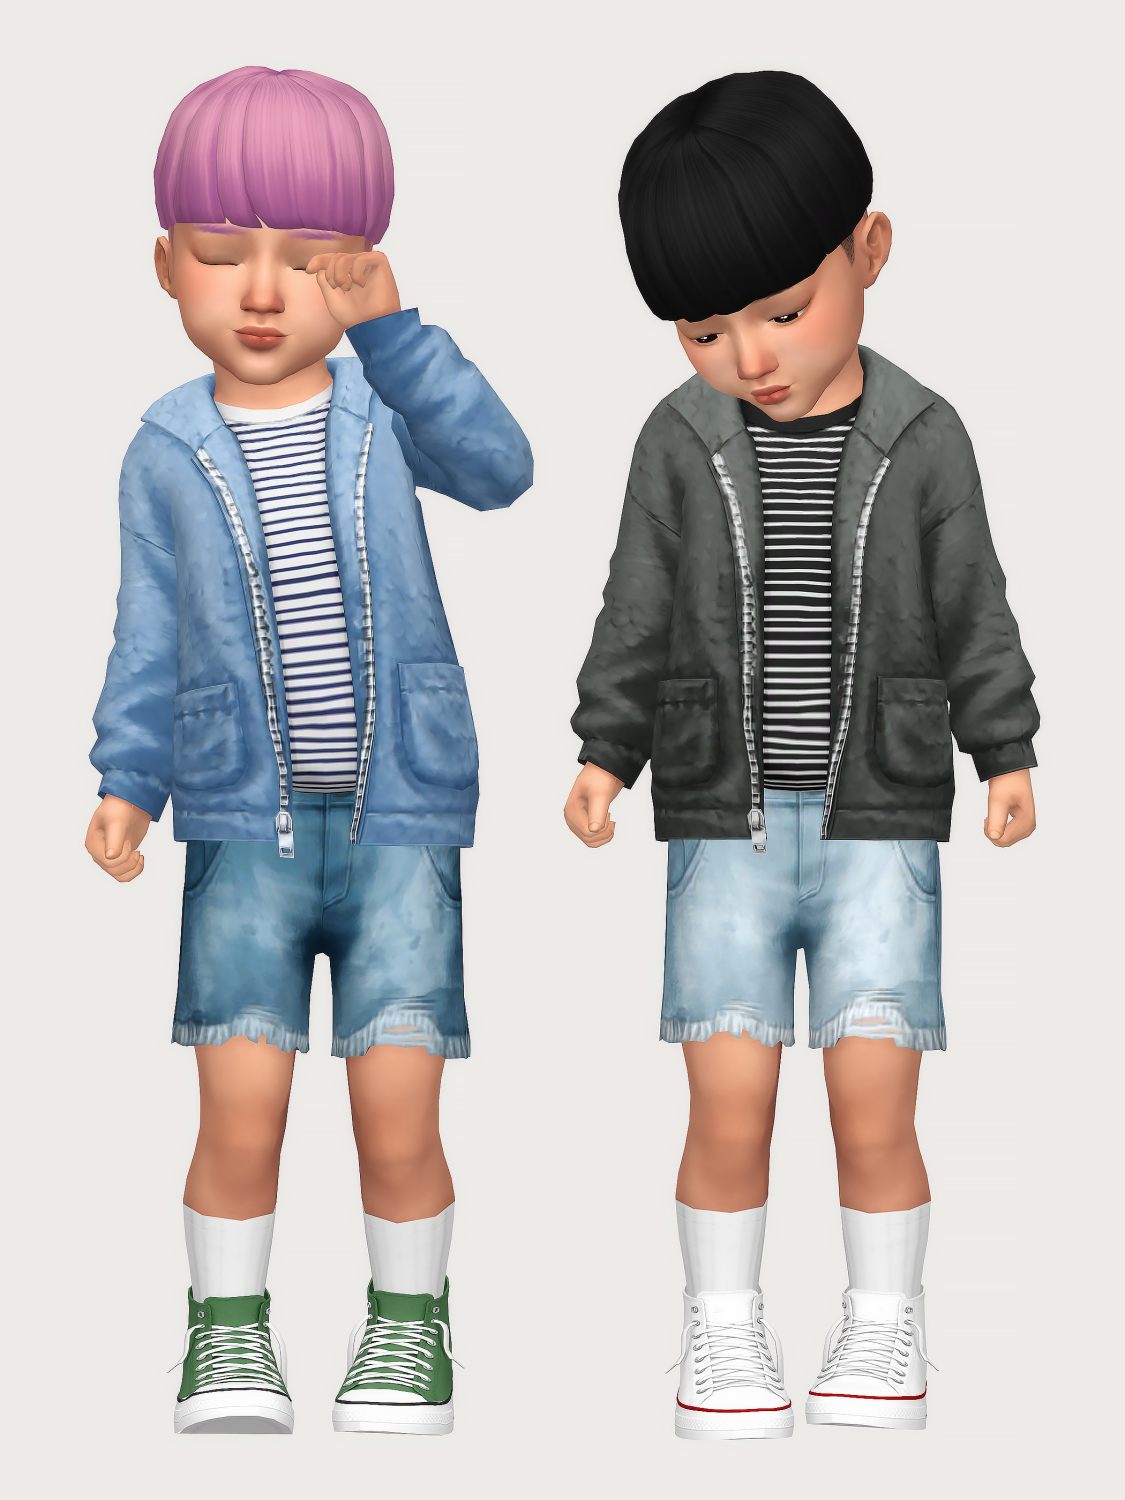 mimi collection - toddler - The Sims 4 Create a Sim - CurseForge